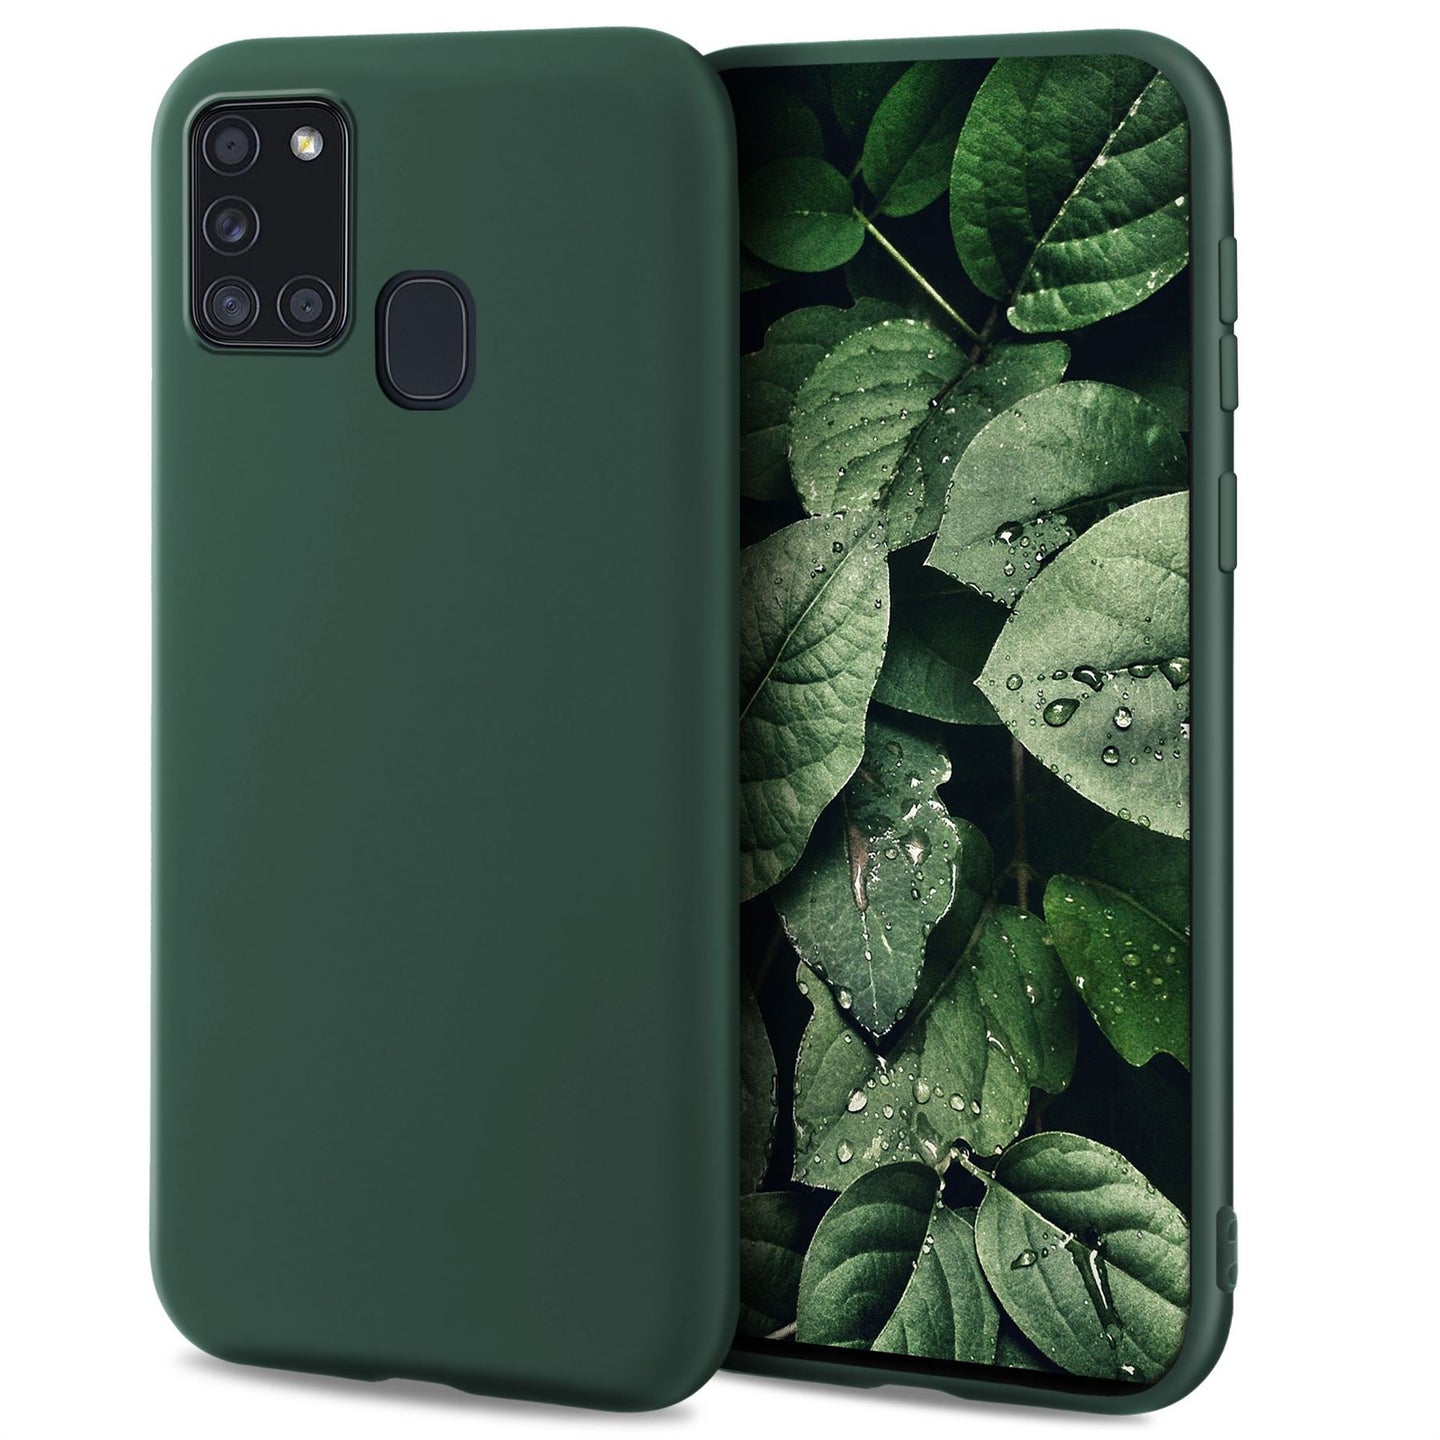 Moozy Minimalist Series Silicone Case for Samsung A21s, Midnight Green - Matte Finish Slim Soft TPU Cover